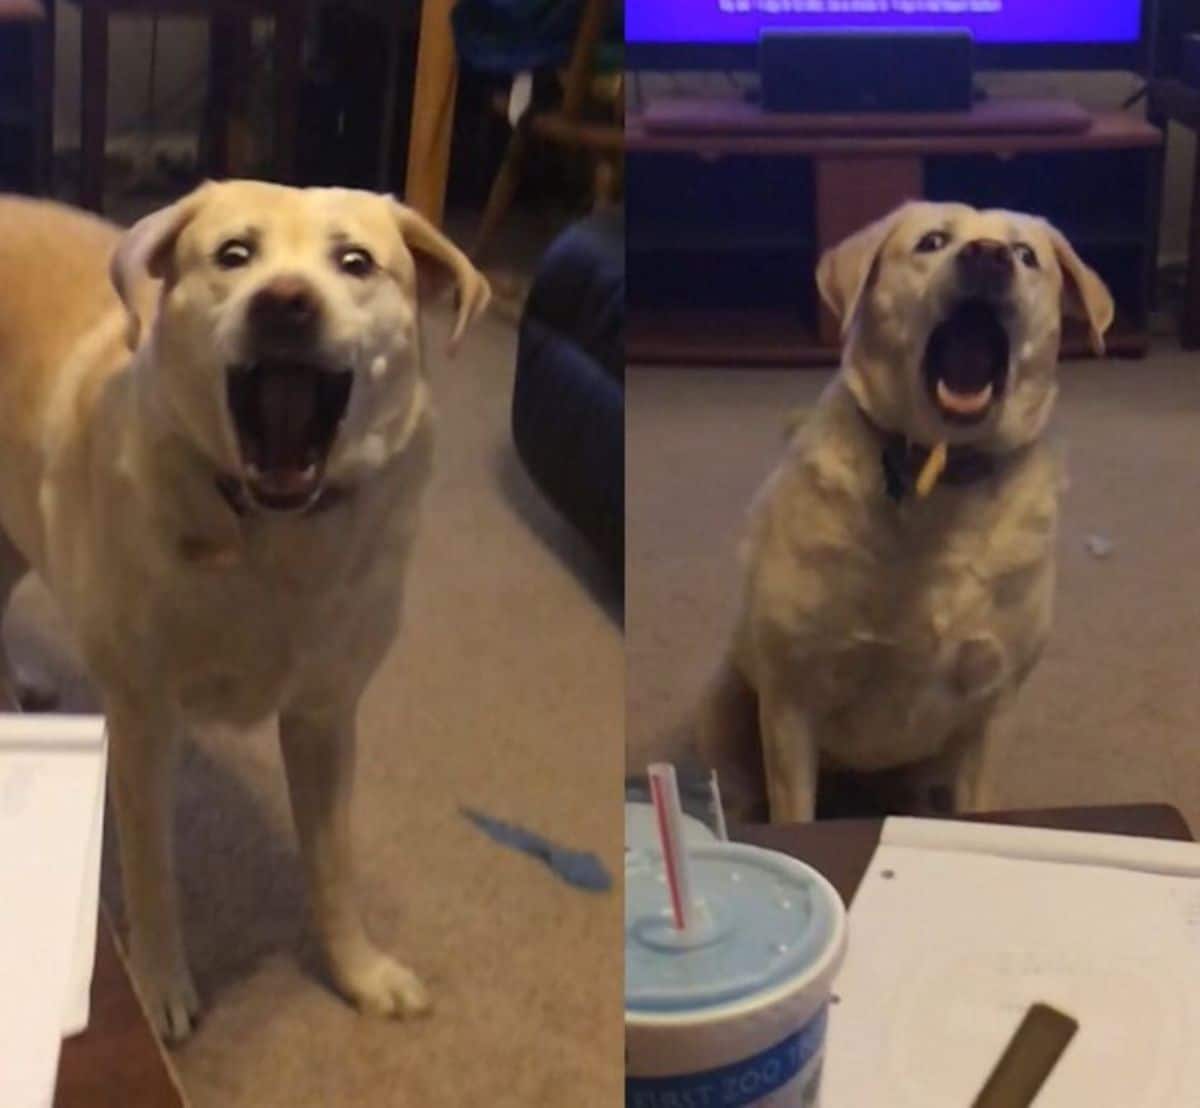 2 photos of a brown dog with its mouth open